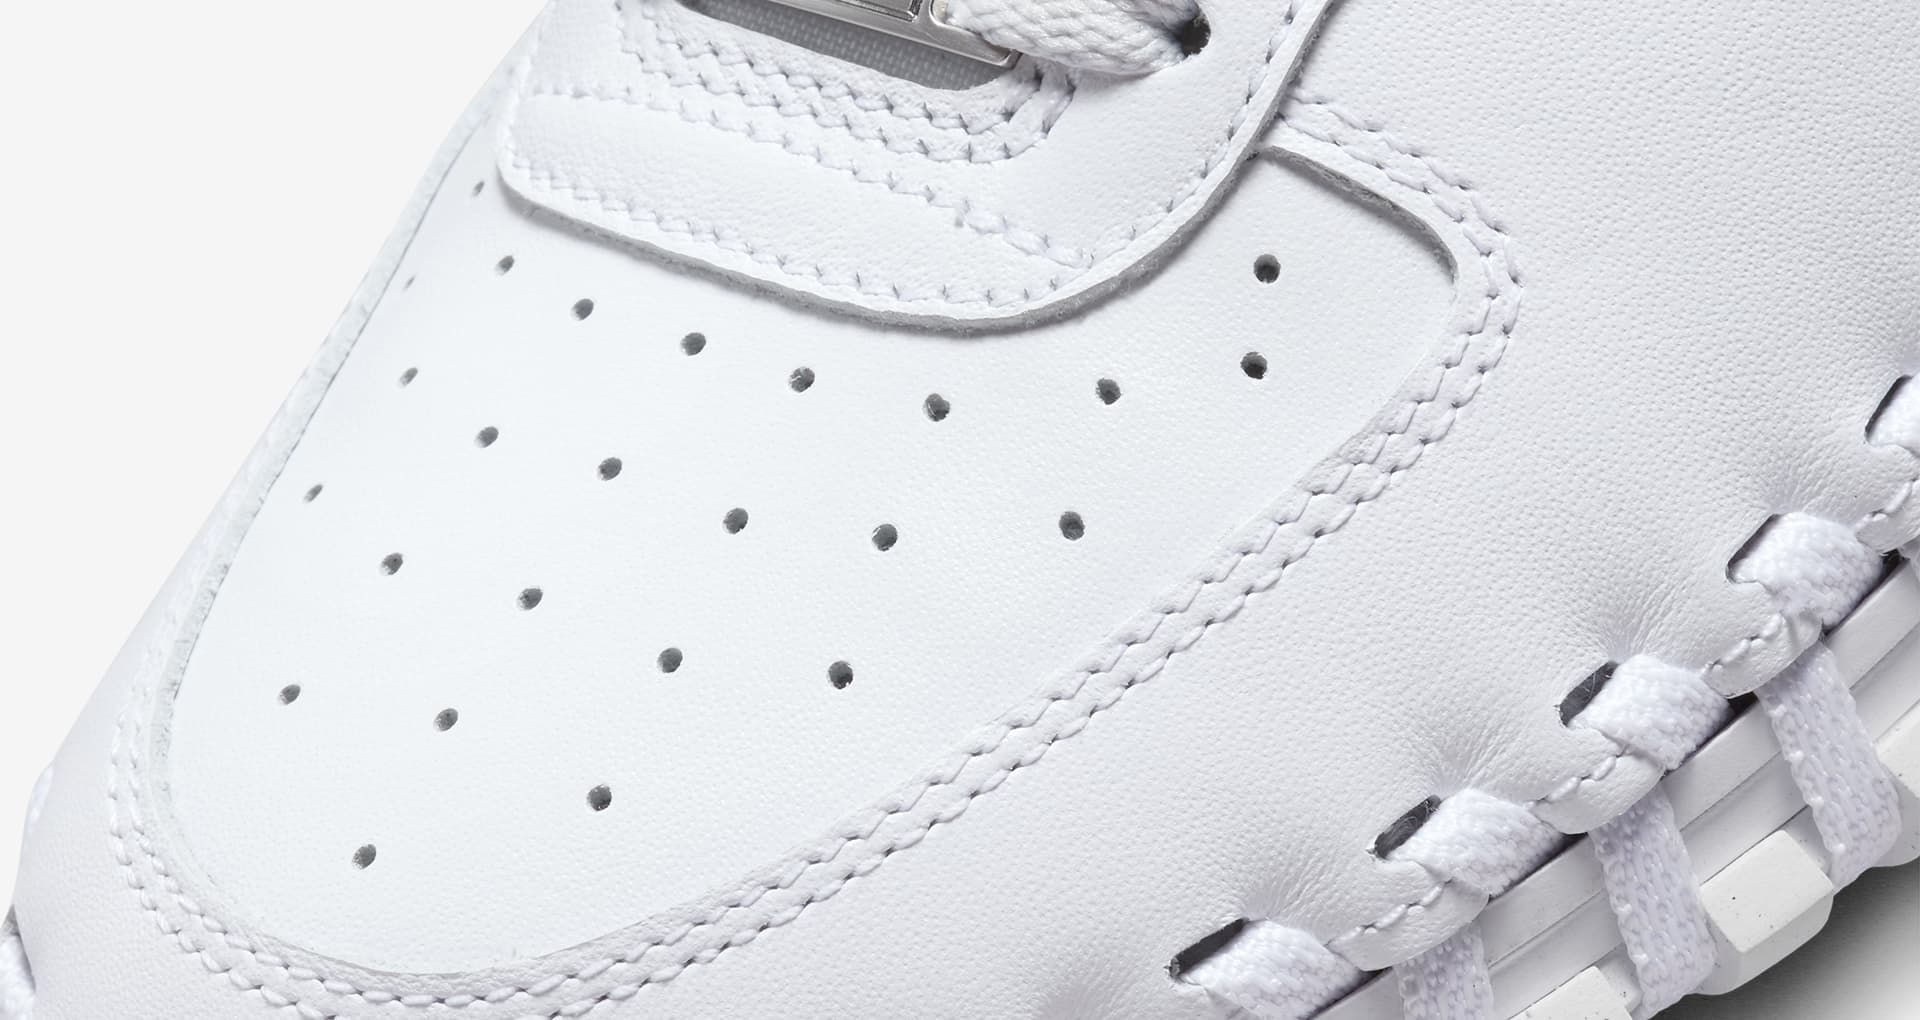 J Force 1 'White' (DR0424-100) Release Date. Nike SNKRS ID